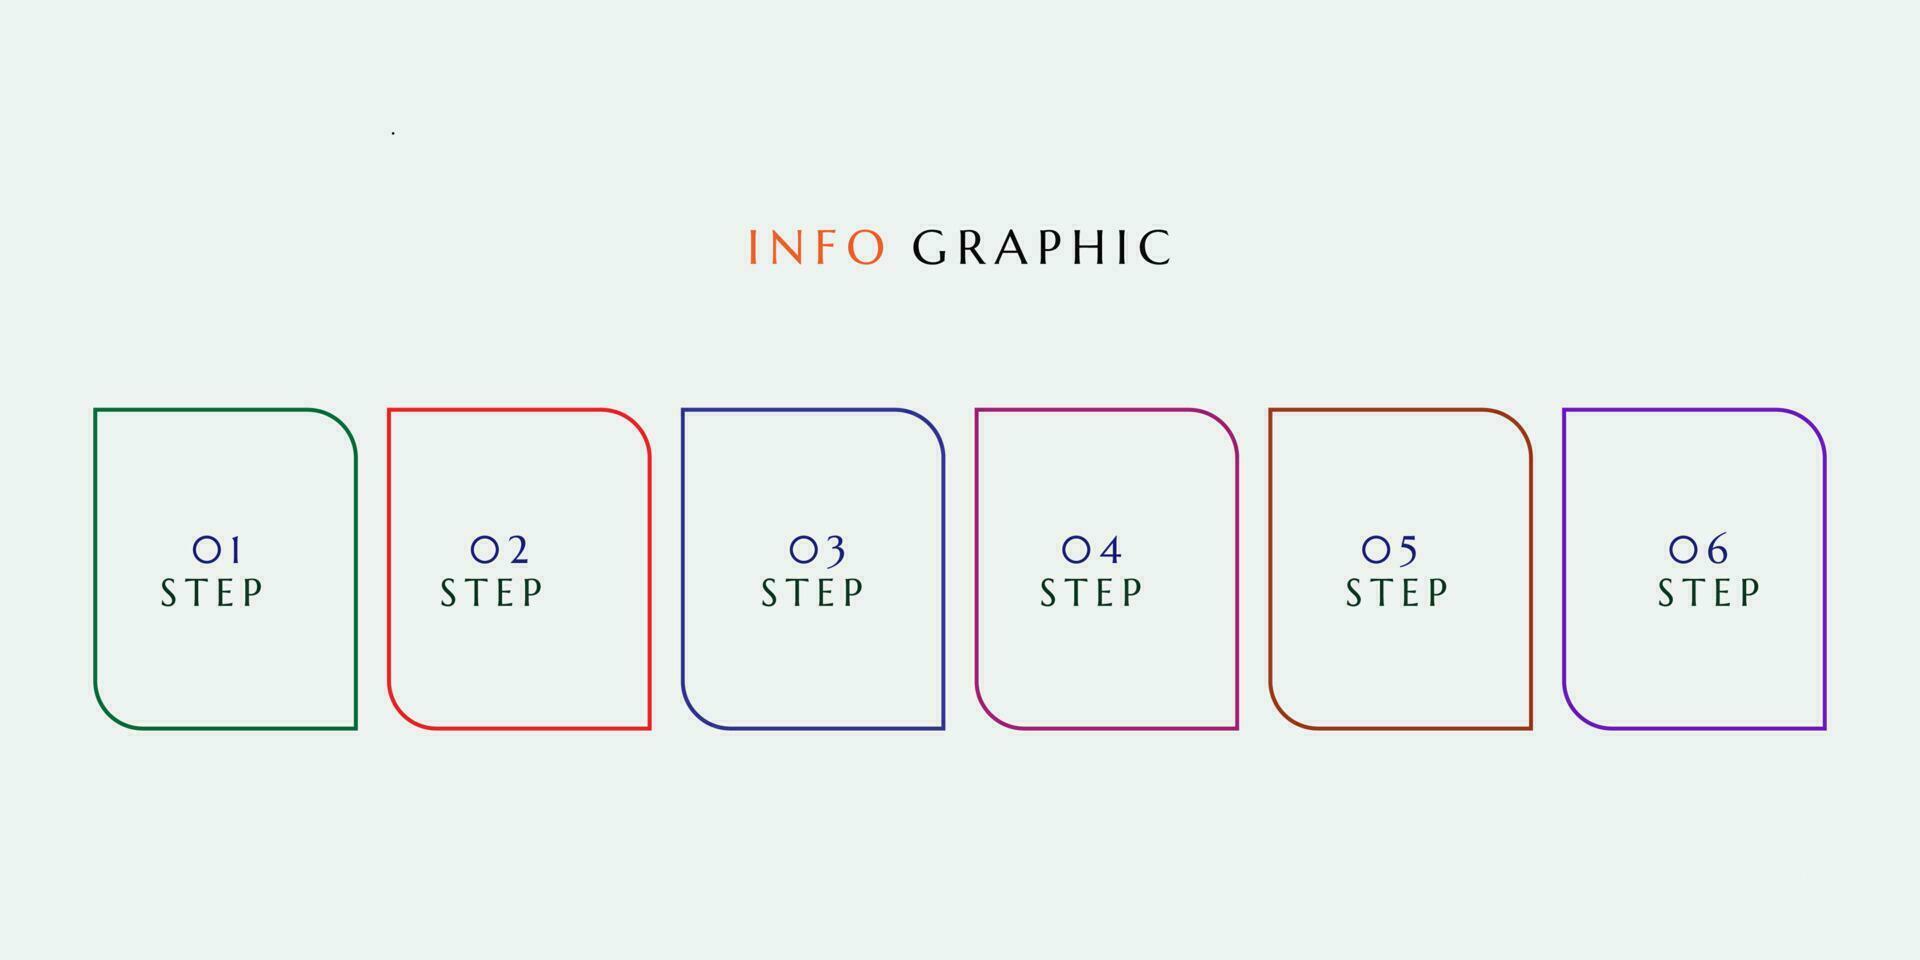 Infographic Template Design with 6 Choices or Steps. Can be used for Process diagrams, presentations, Layouts and More vector